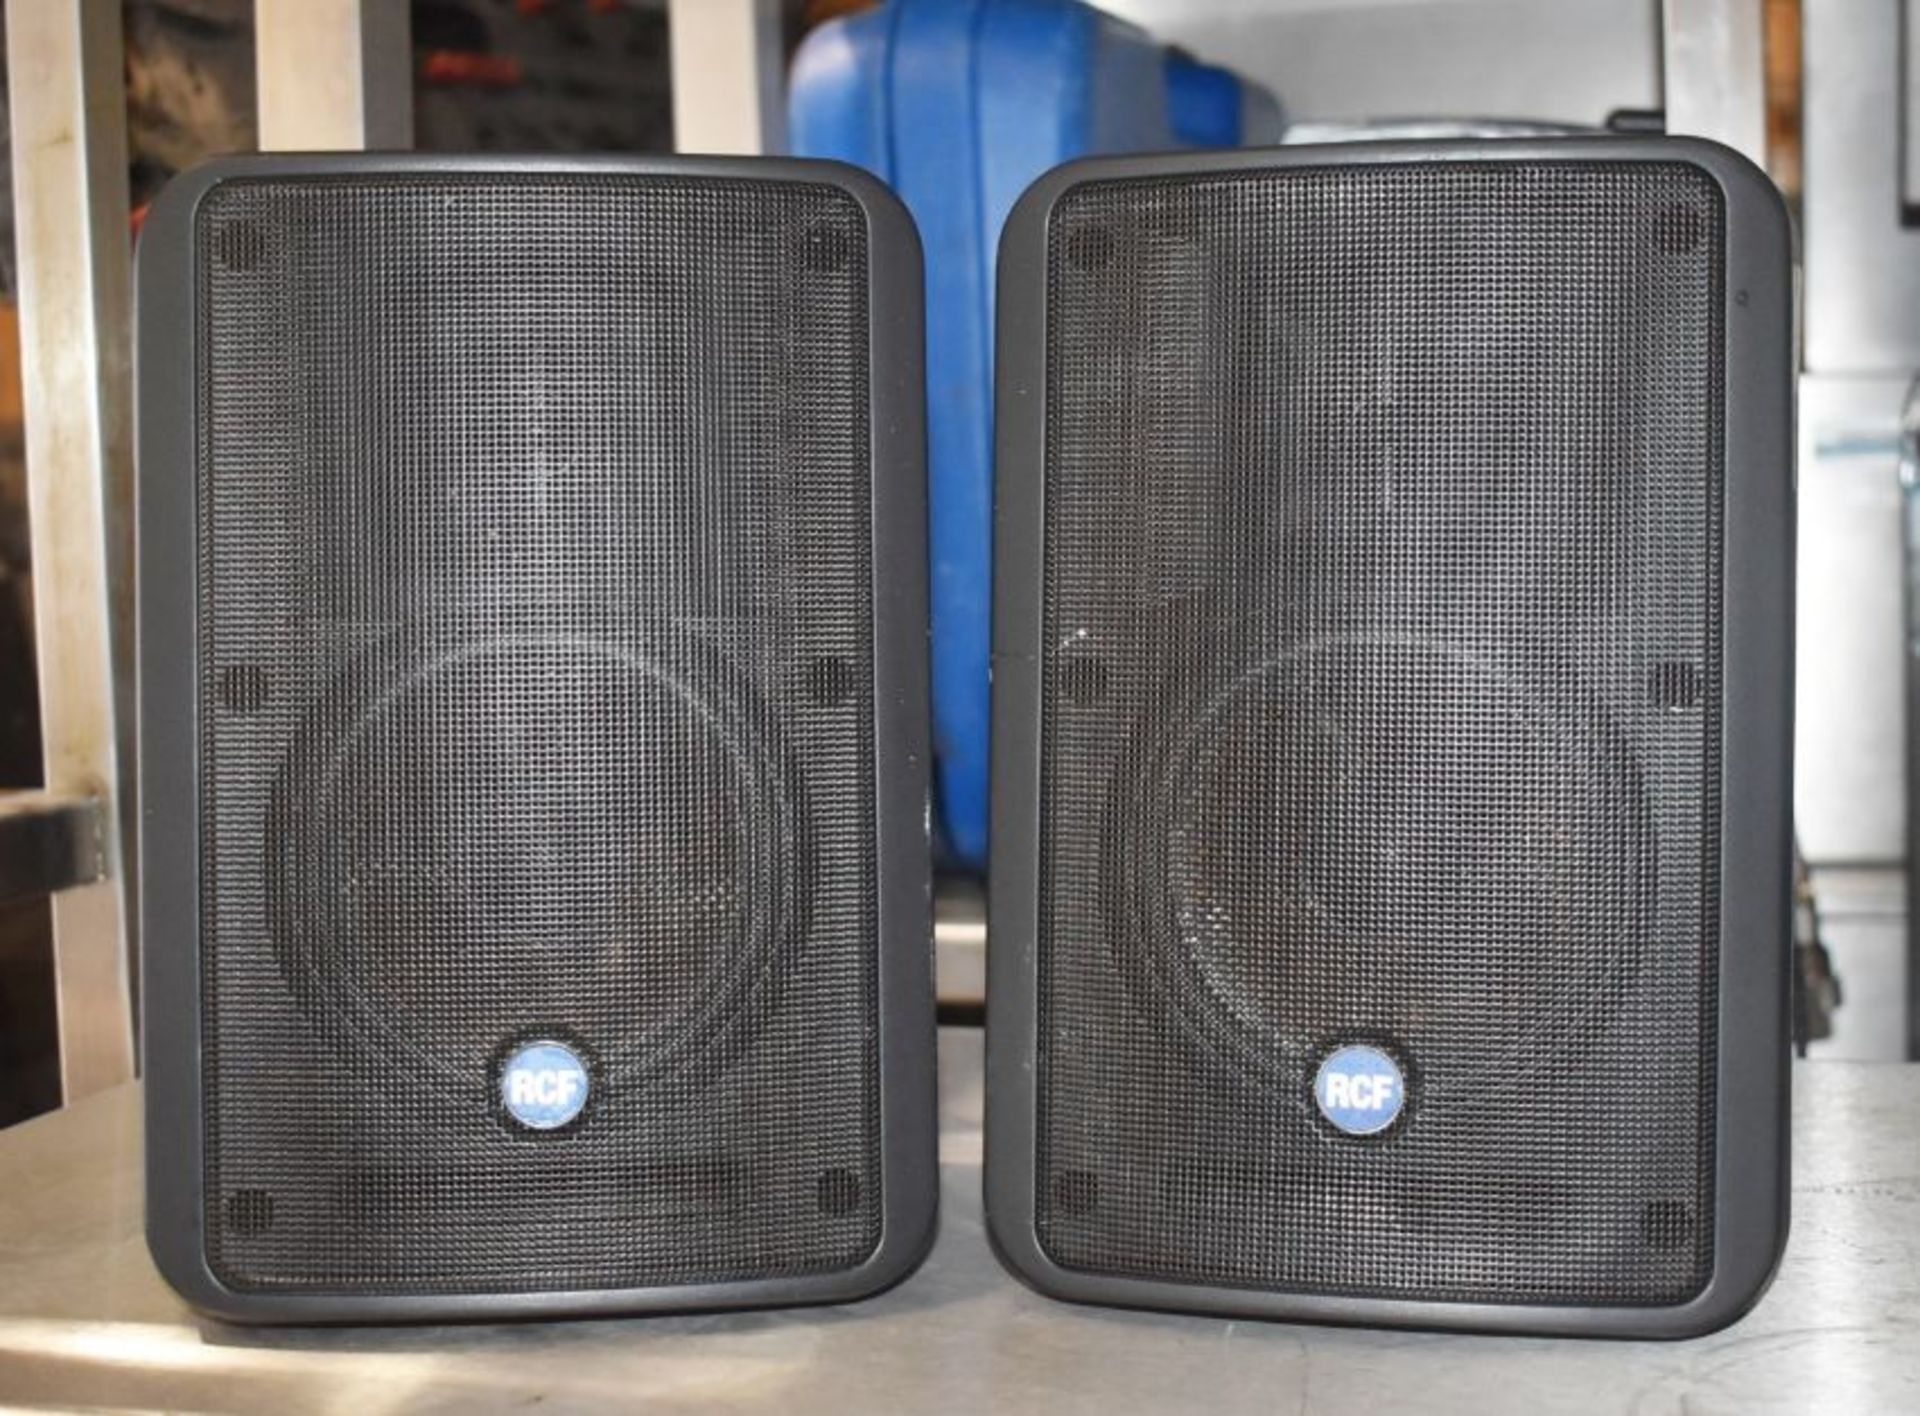 4 x RCF 175-Watt Two-Way Compact Monitor Speakers - Model Monitor 55 - RRP £492 - Ref: WH3 - CL999 - - Image 8 of 8